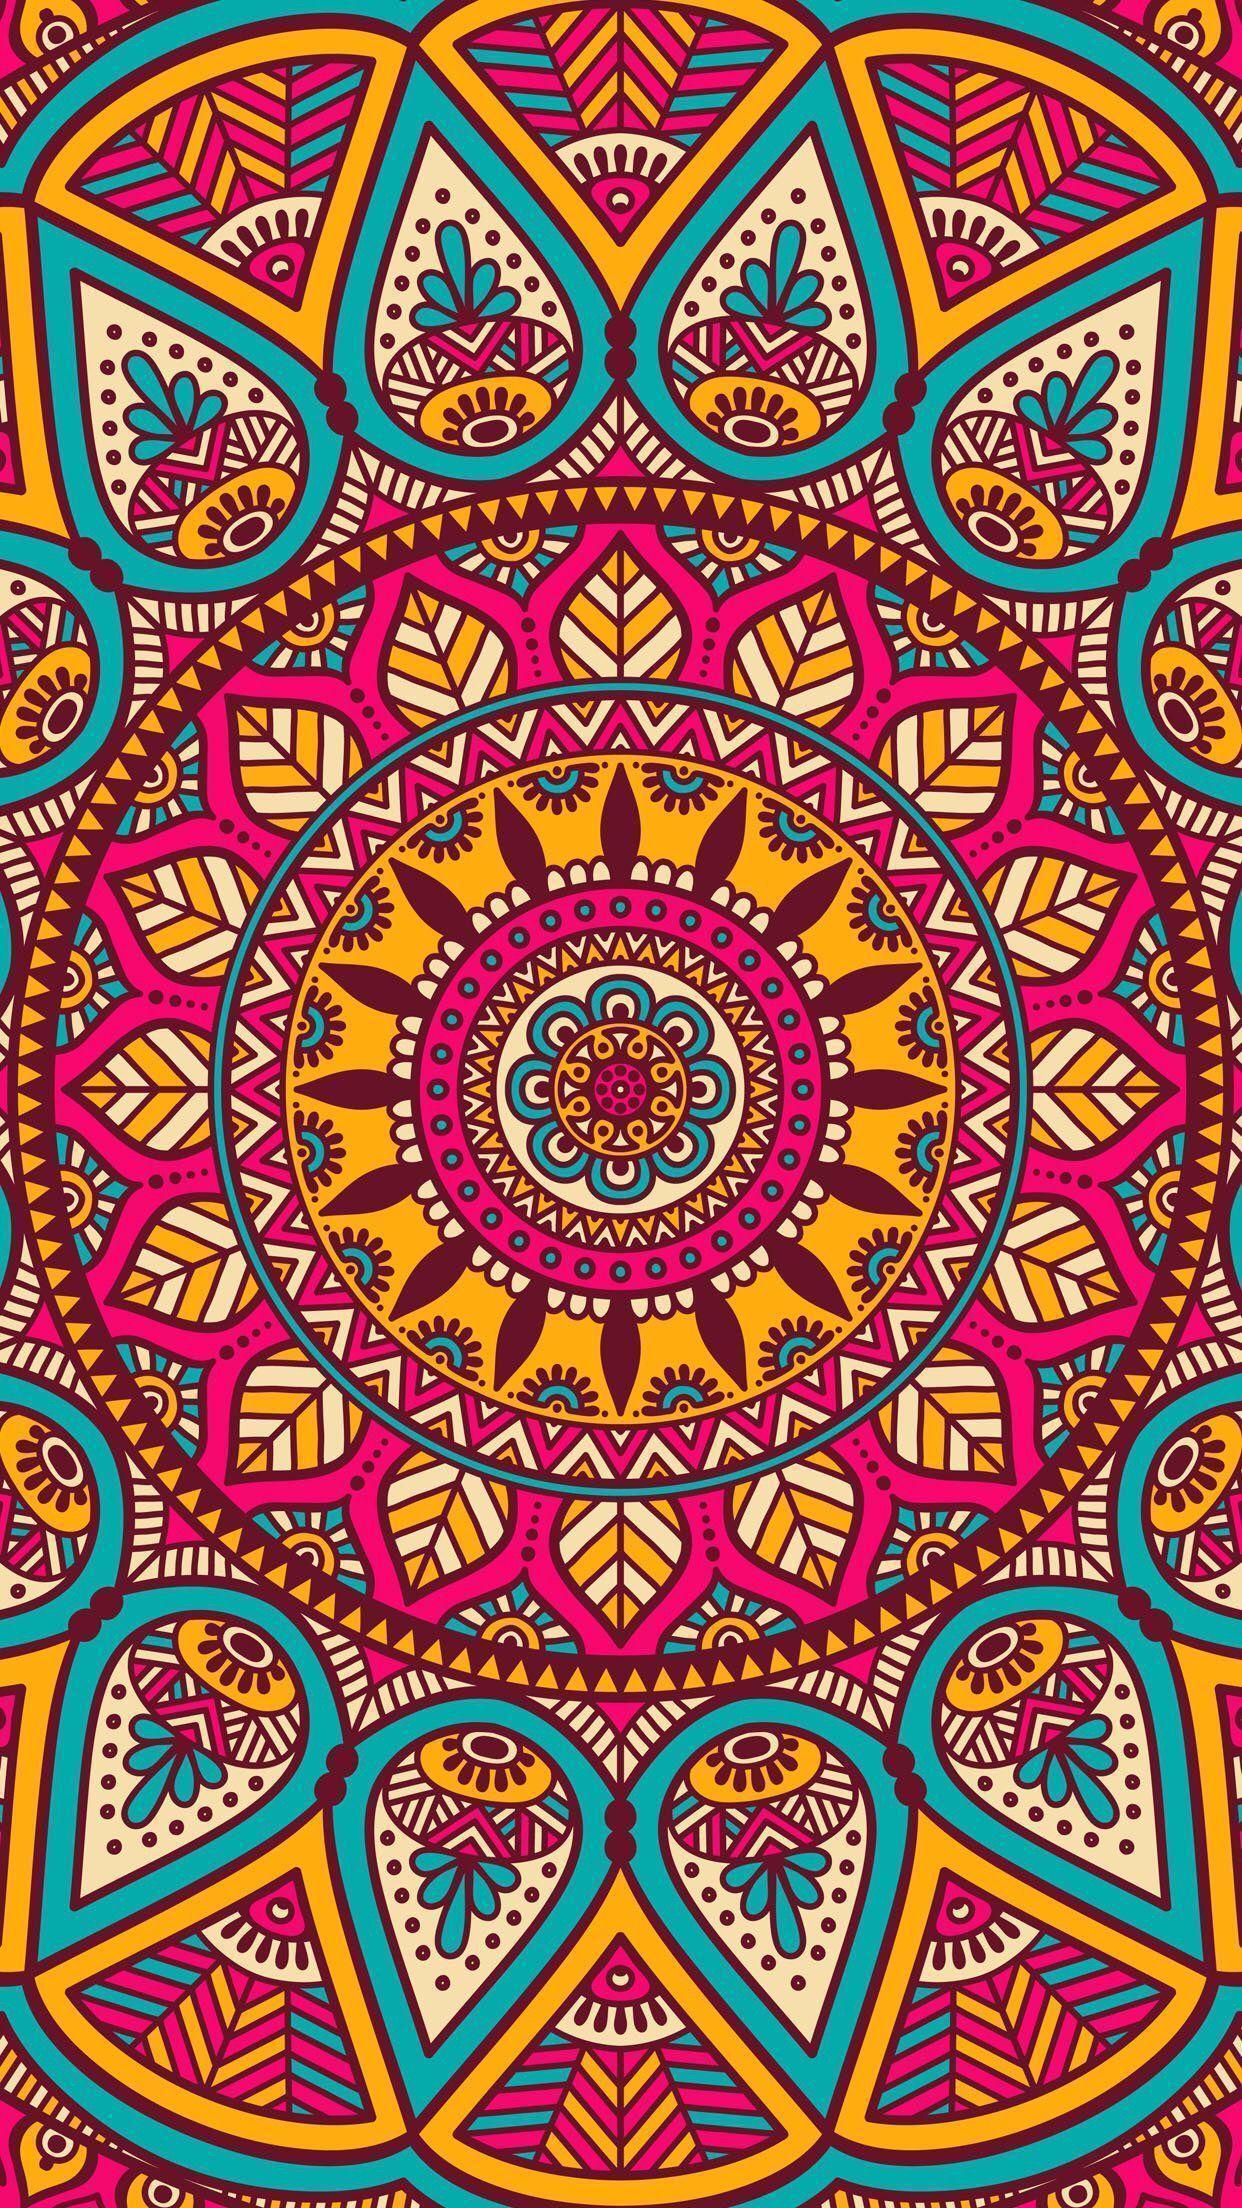 FREE mandala art wallpaper for iPhone and iPod Touch. Techno